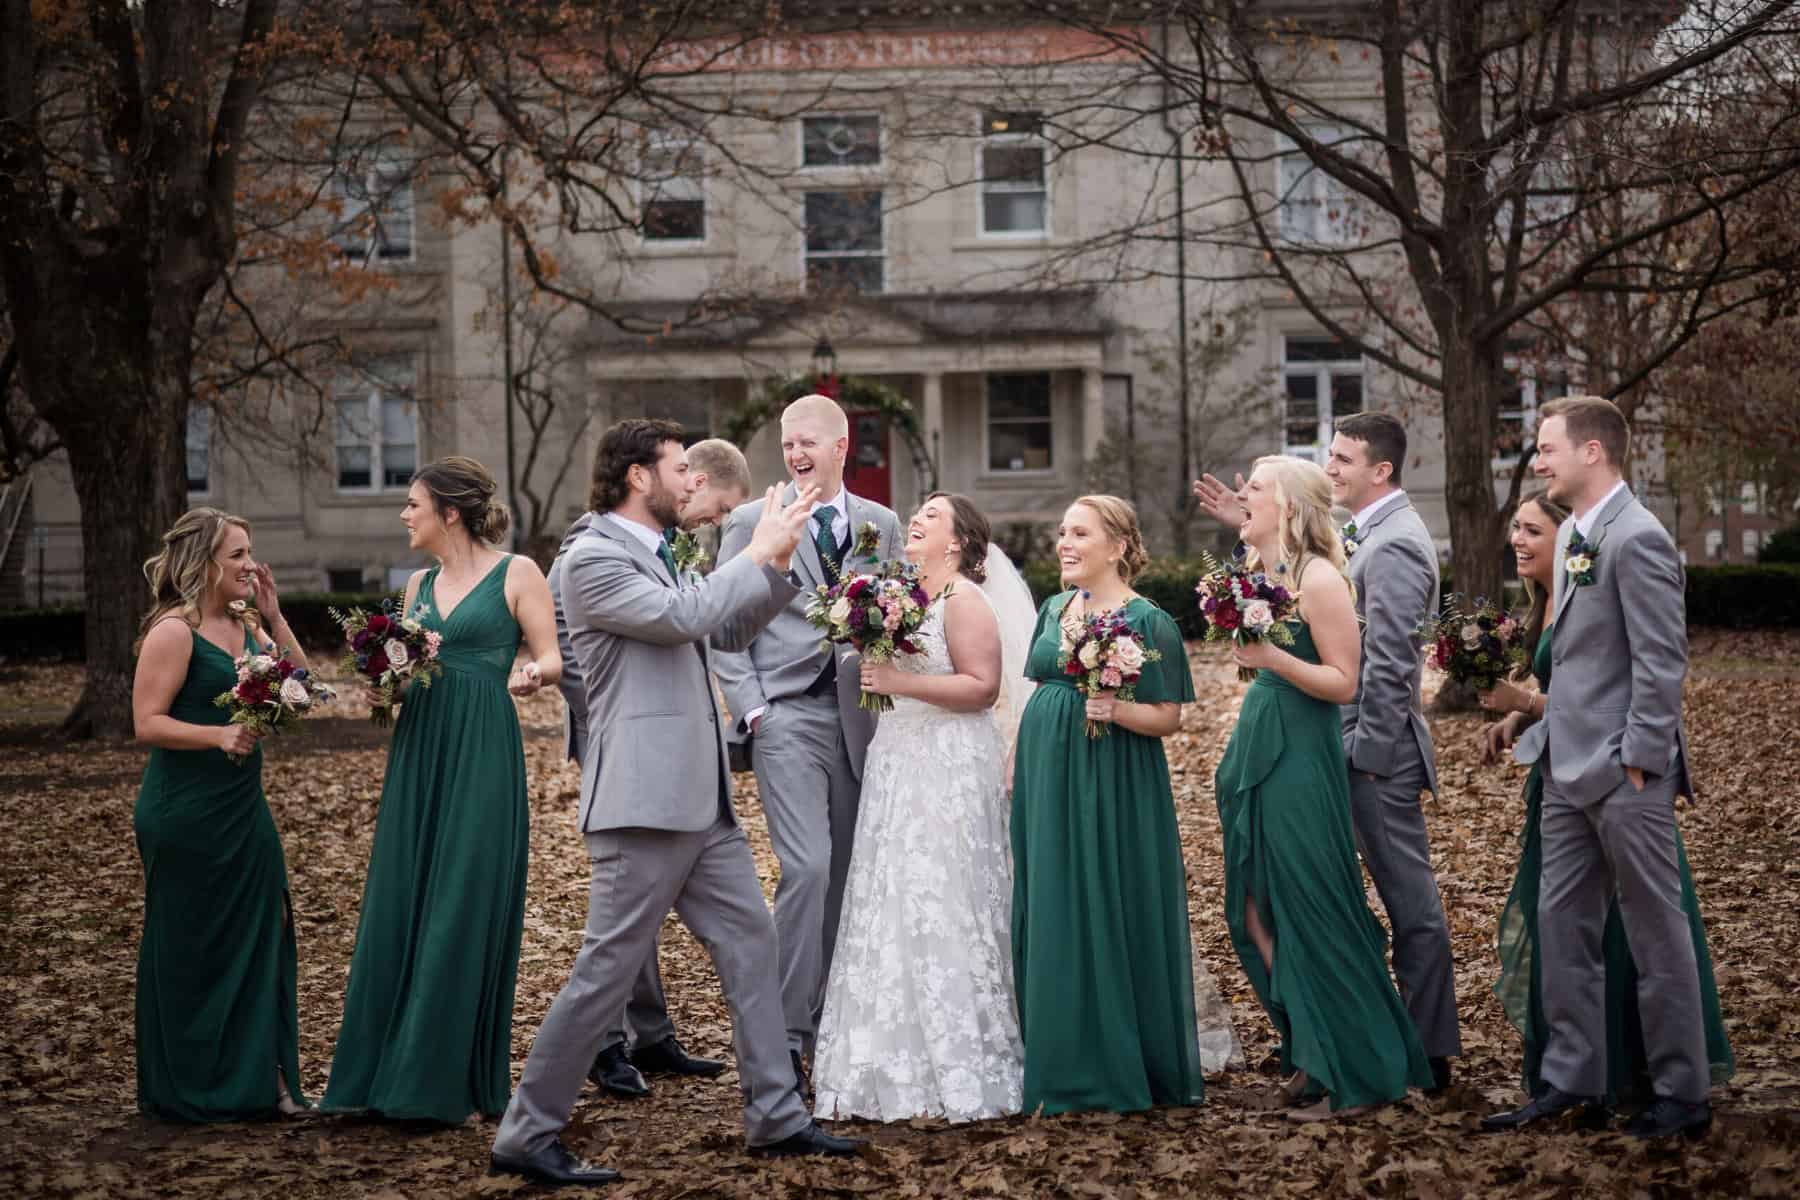 A group of bridesmaids and groomsmen posing in front of a building.